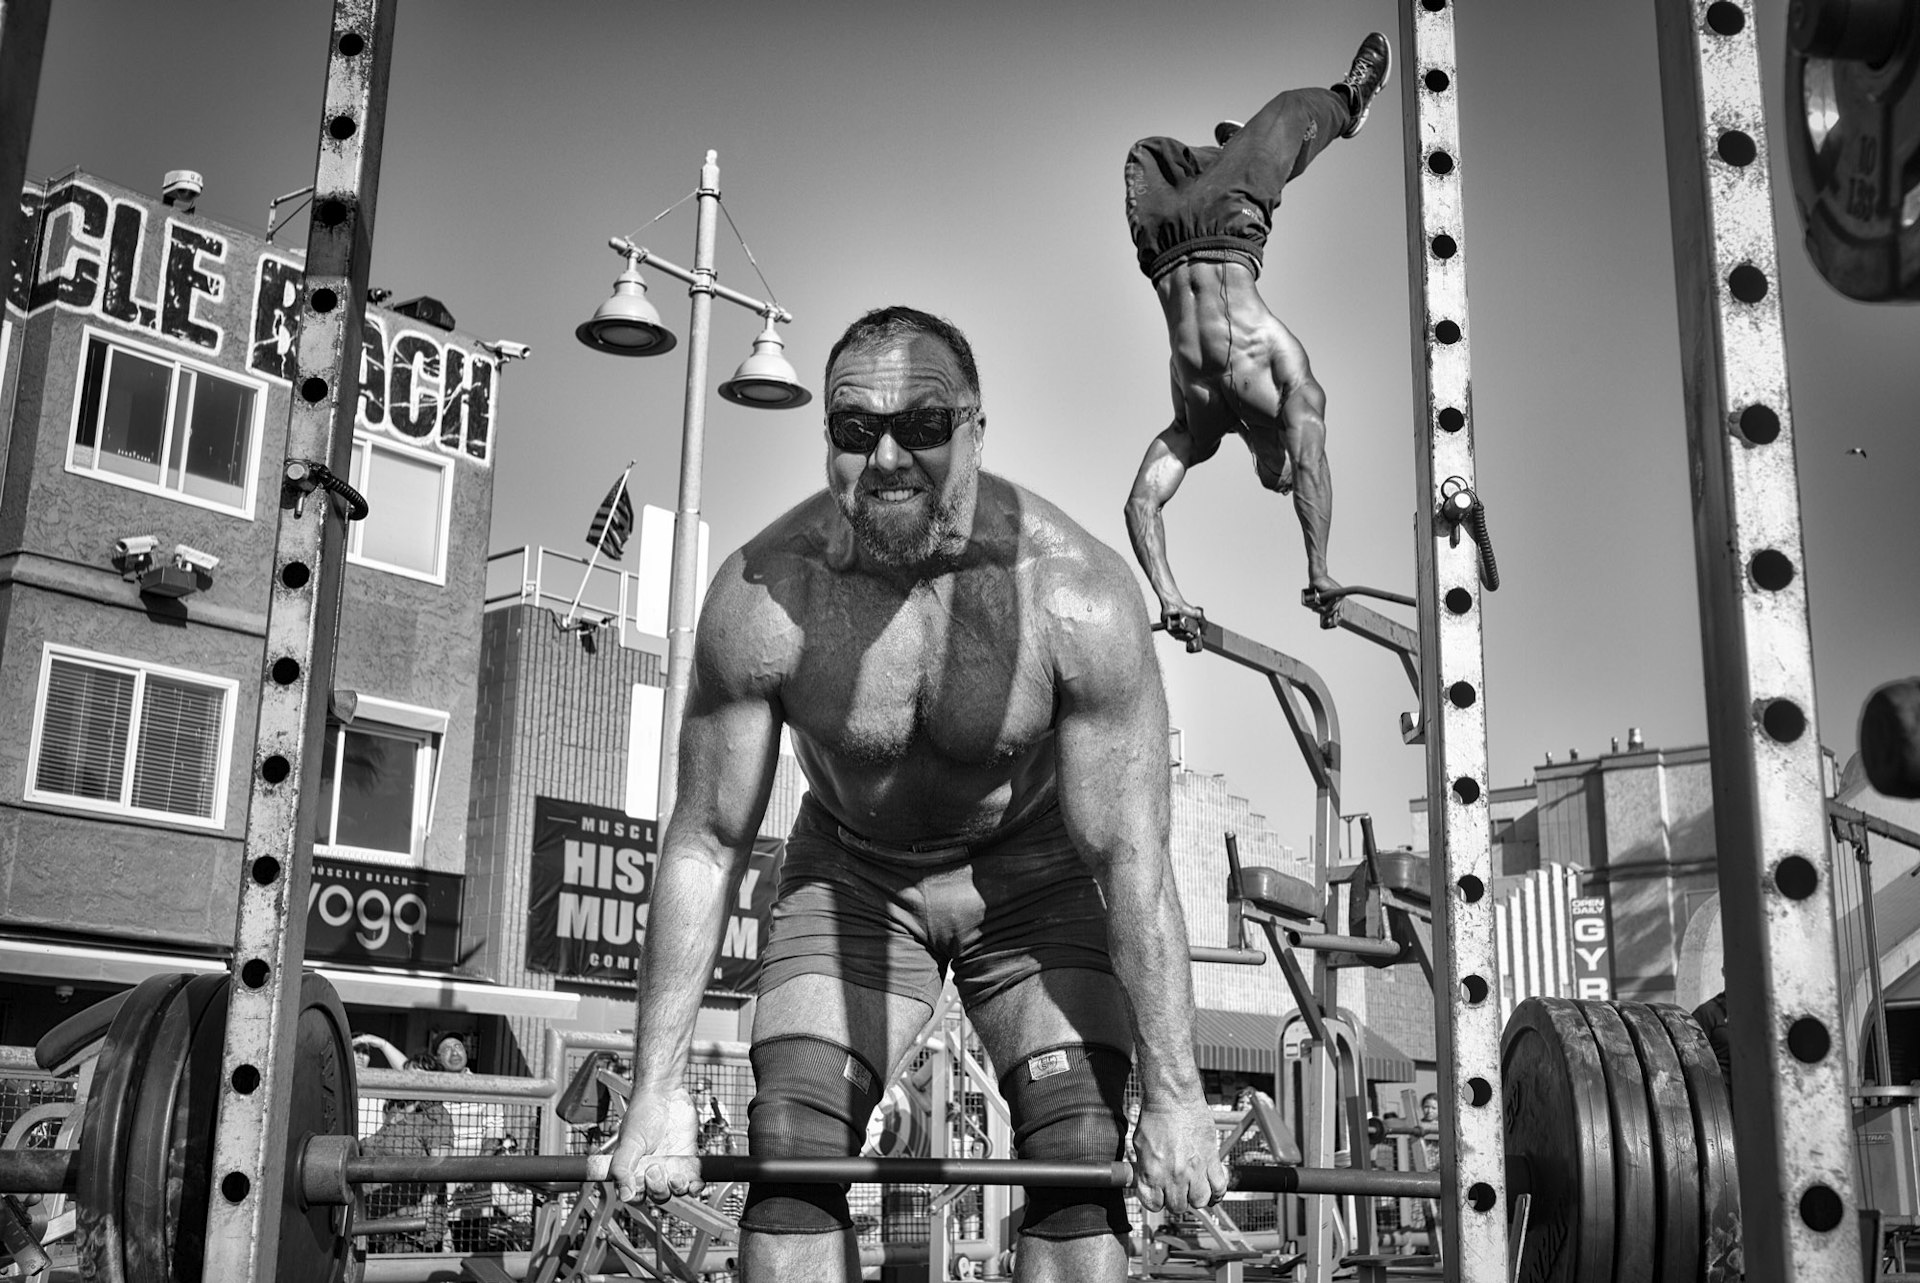 A weightlifter raises a barbell loaded with heavy plates while Ike Catcher performs an aerial handstand at the world-famous Muscle Beach Gym. © Dotan Saguy